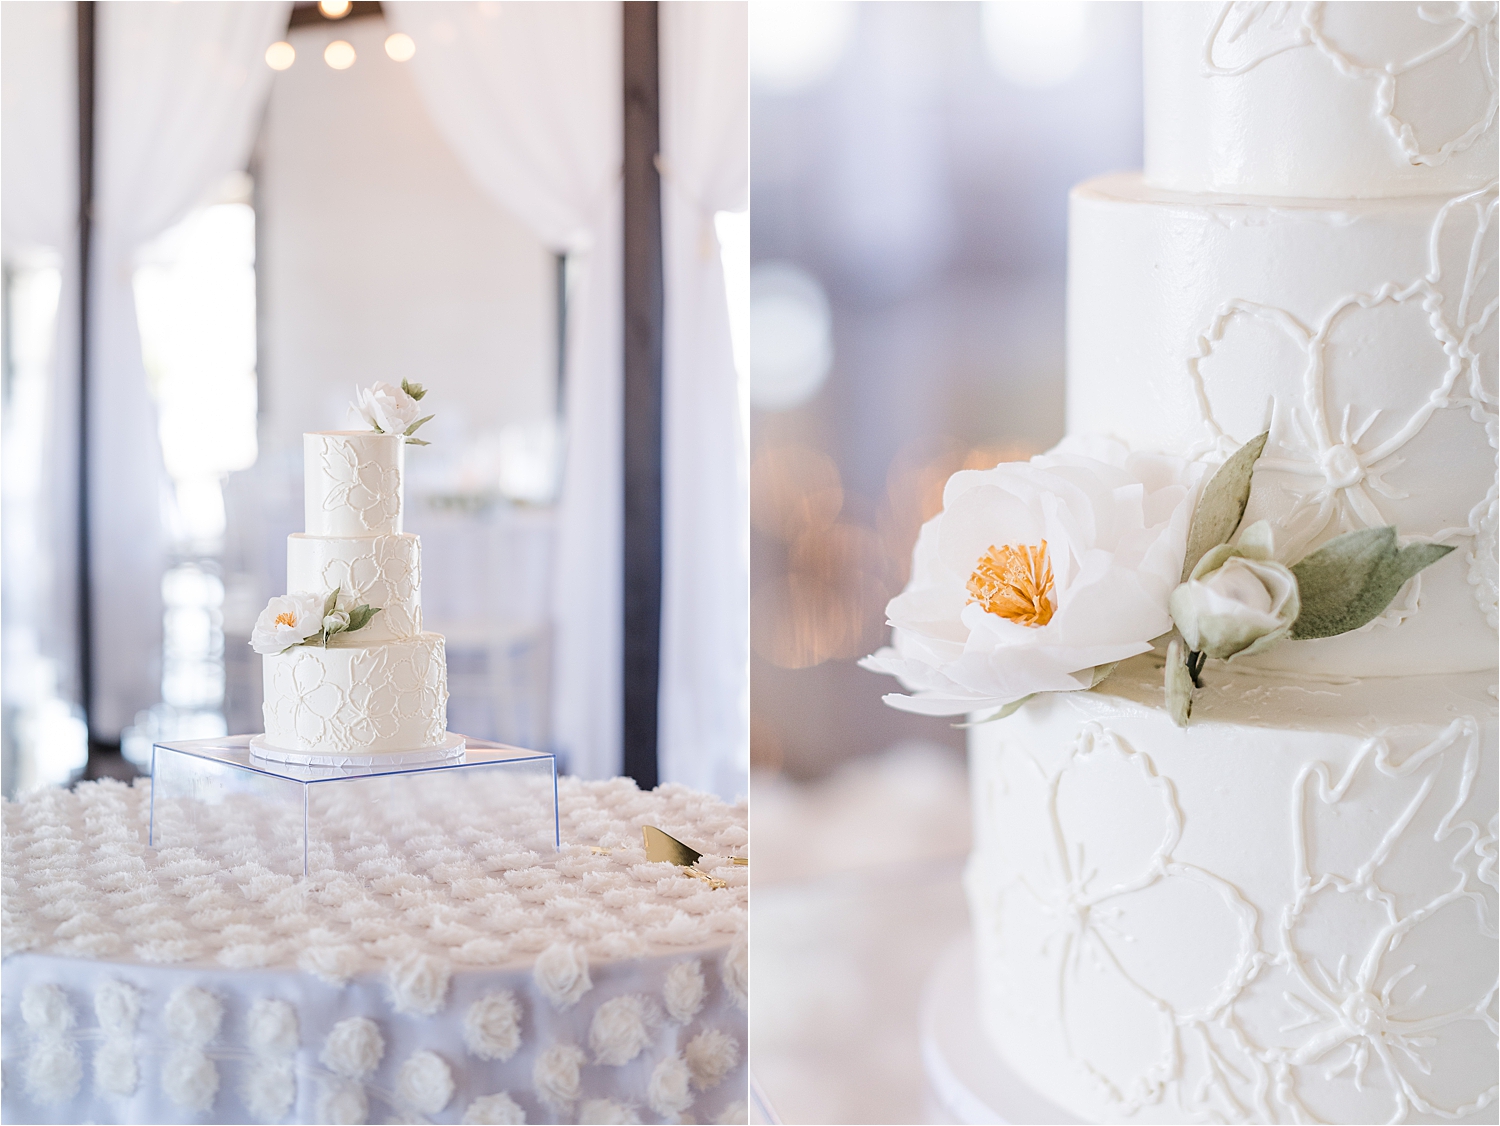 A beautiful wedding cake with handmade, edible flowers at Dream Point Ranch.